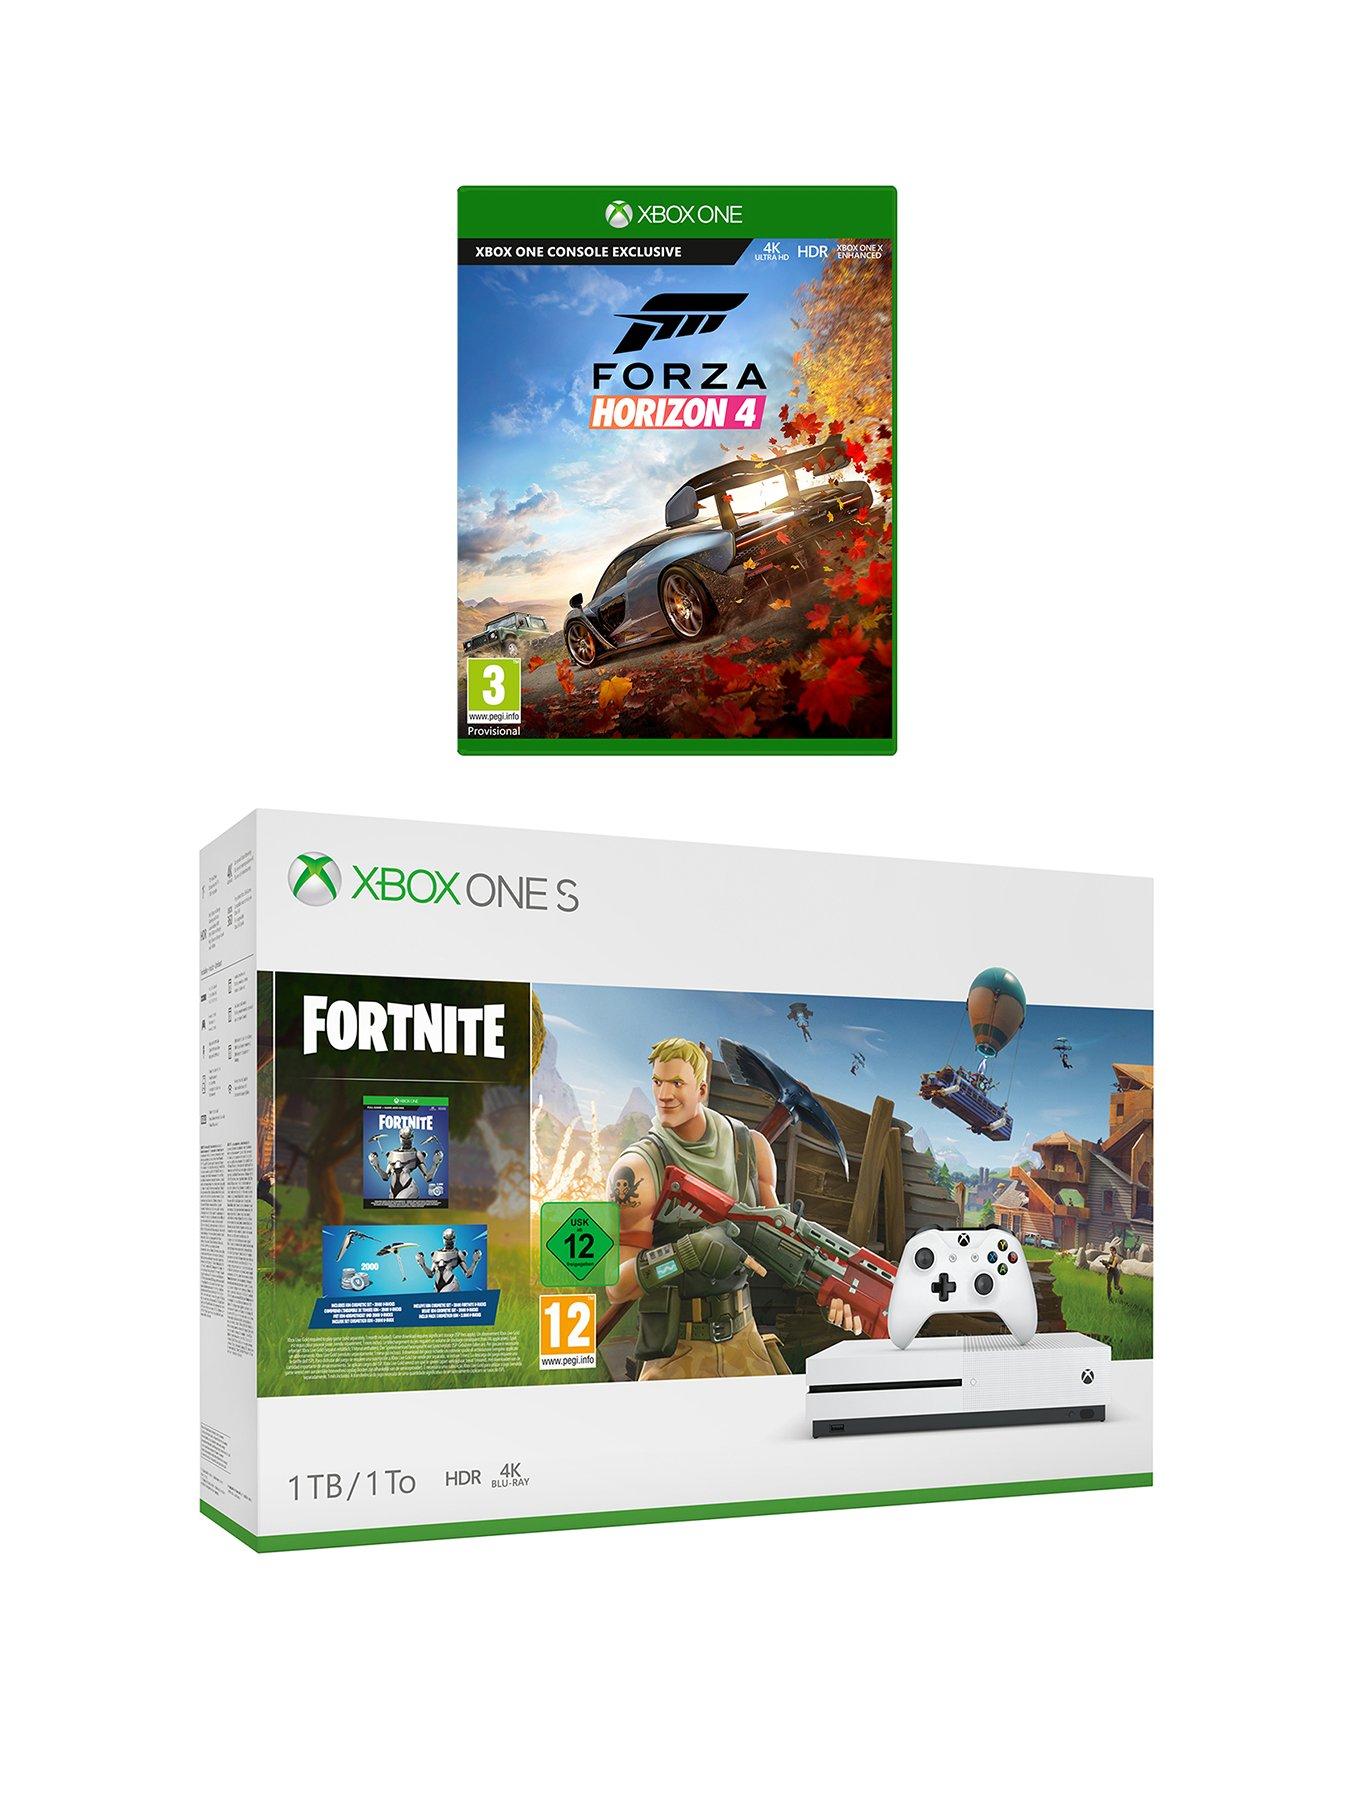 xbox one s fornite 1tb console bundle with forza horizon 4 and optional extras - dolby atmos fortnite xbox